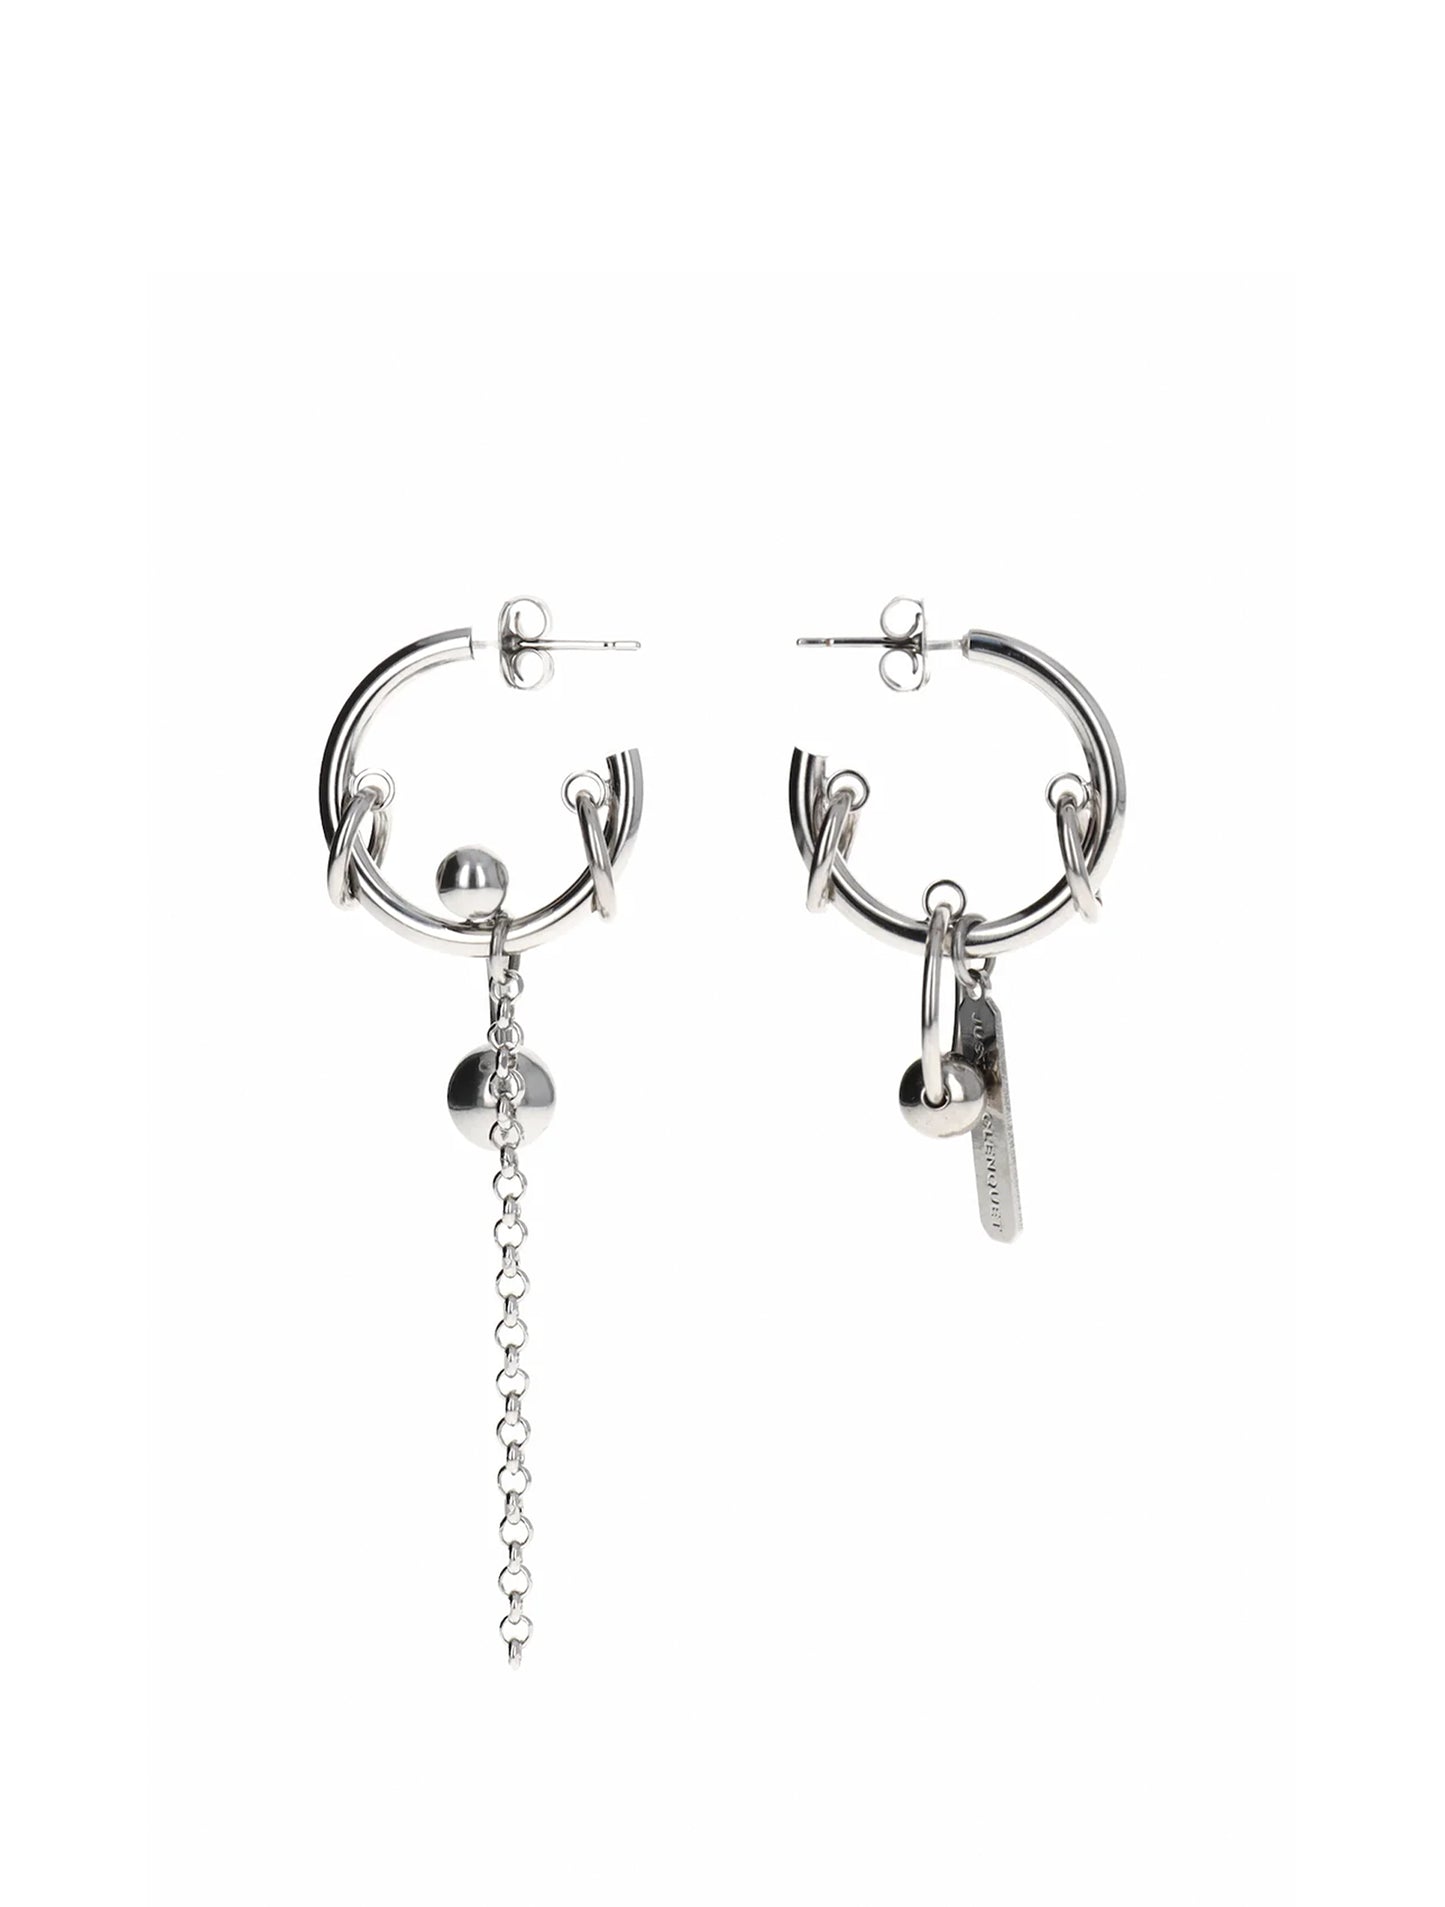 Justine Clenquet Evie Earrings